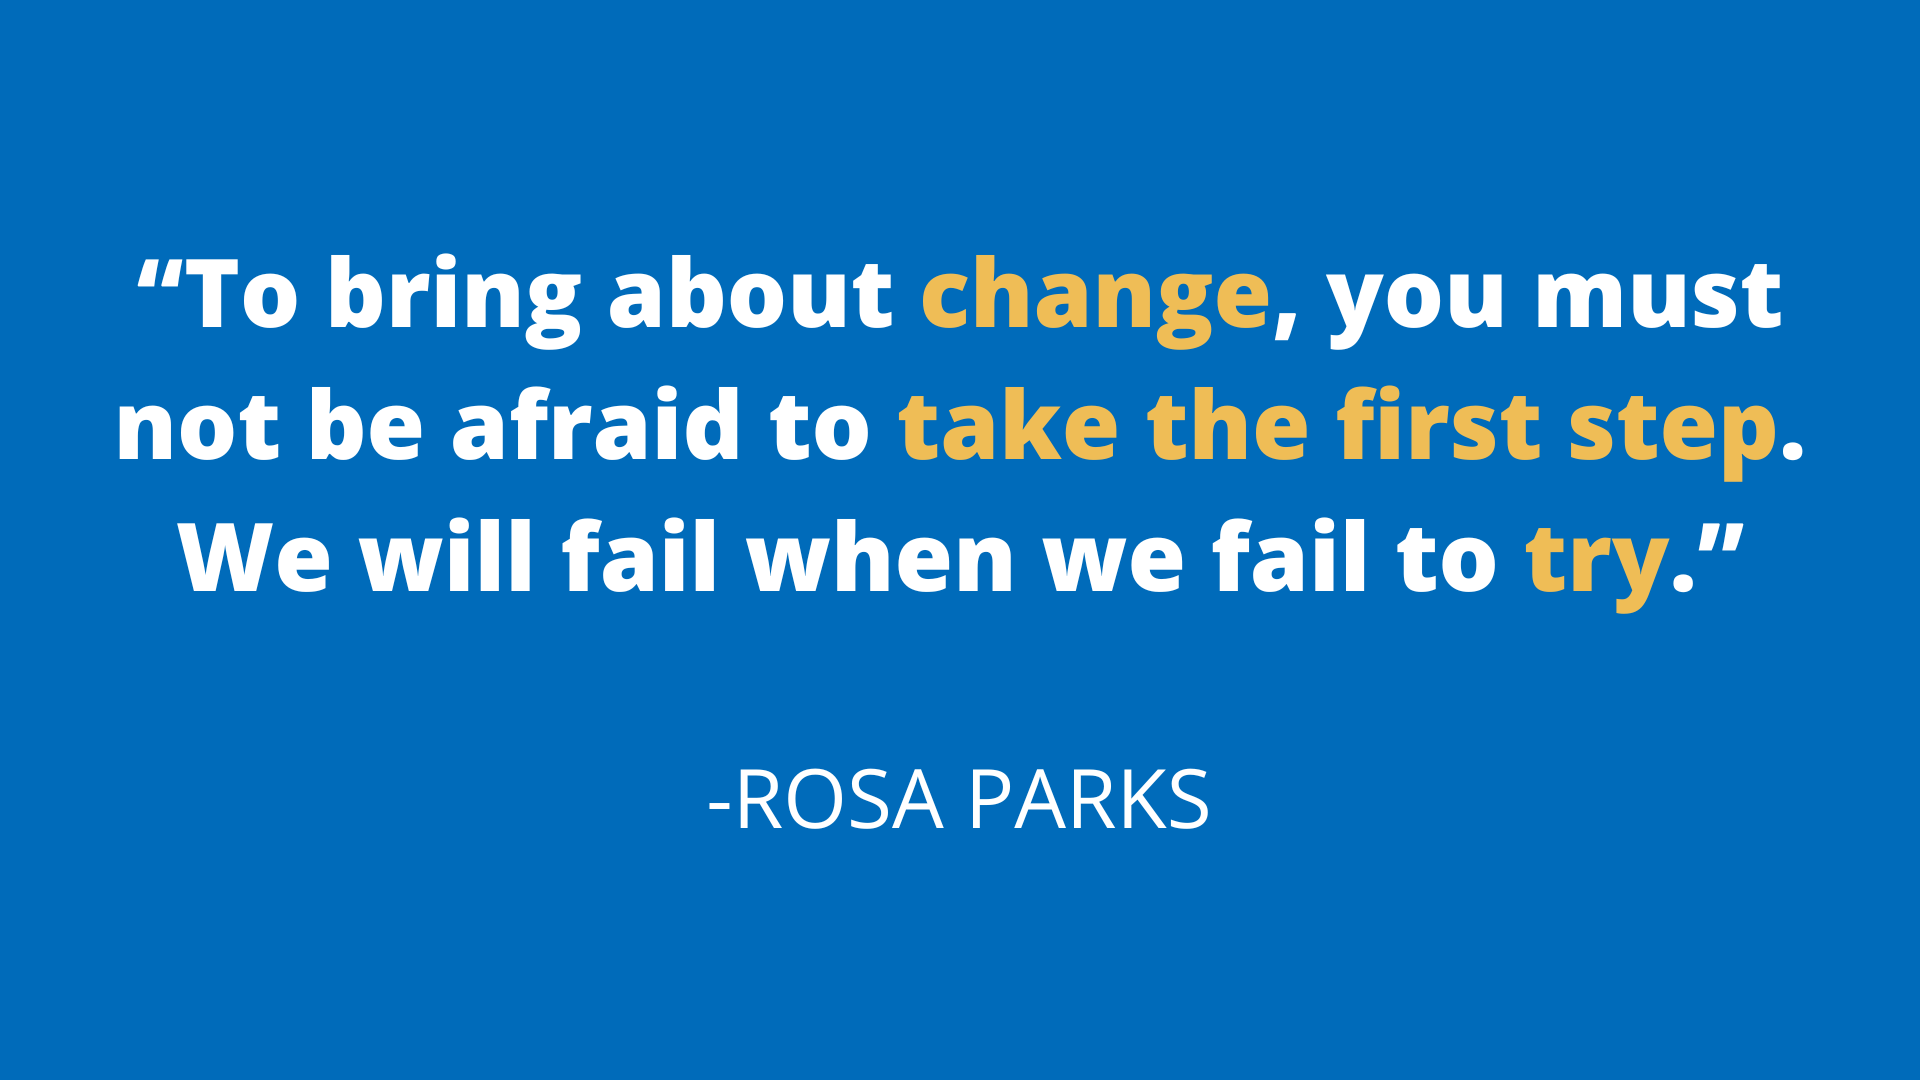 quote from Rosa Parks